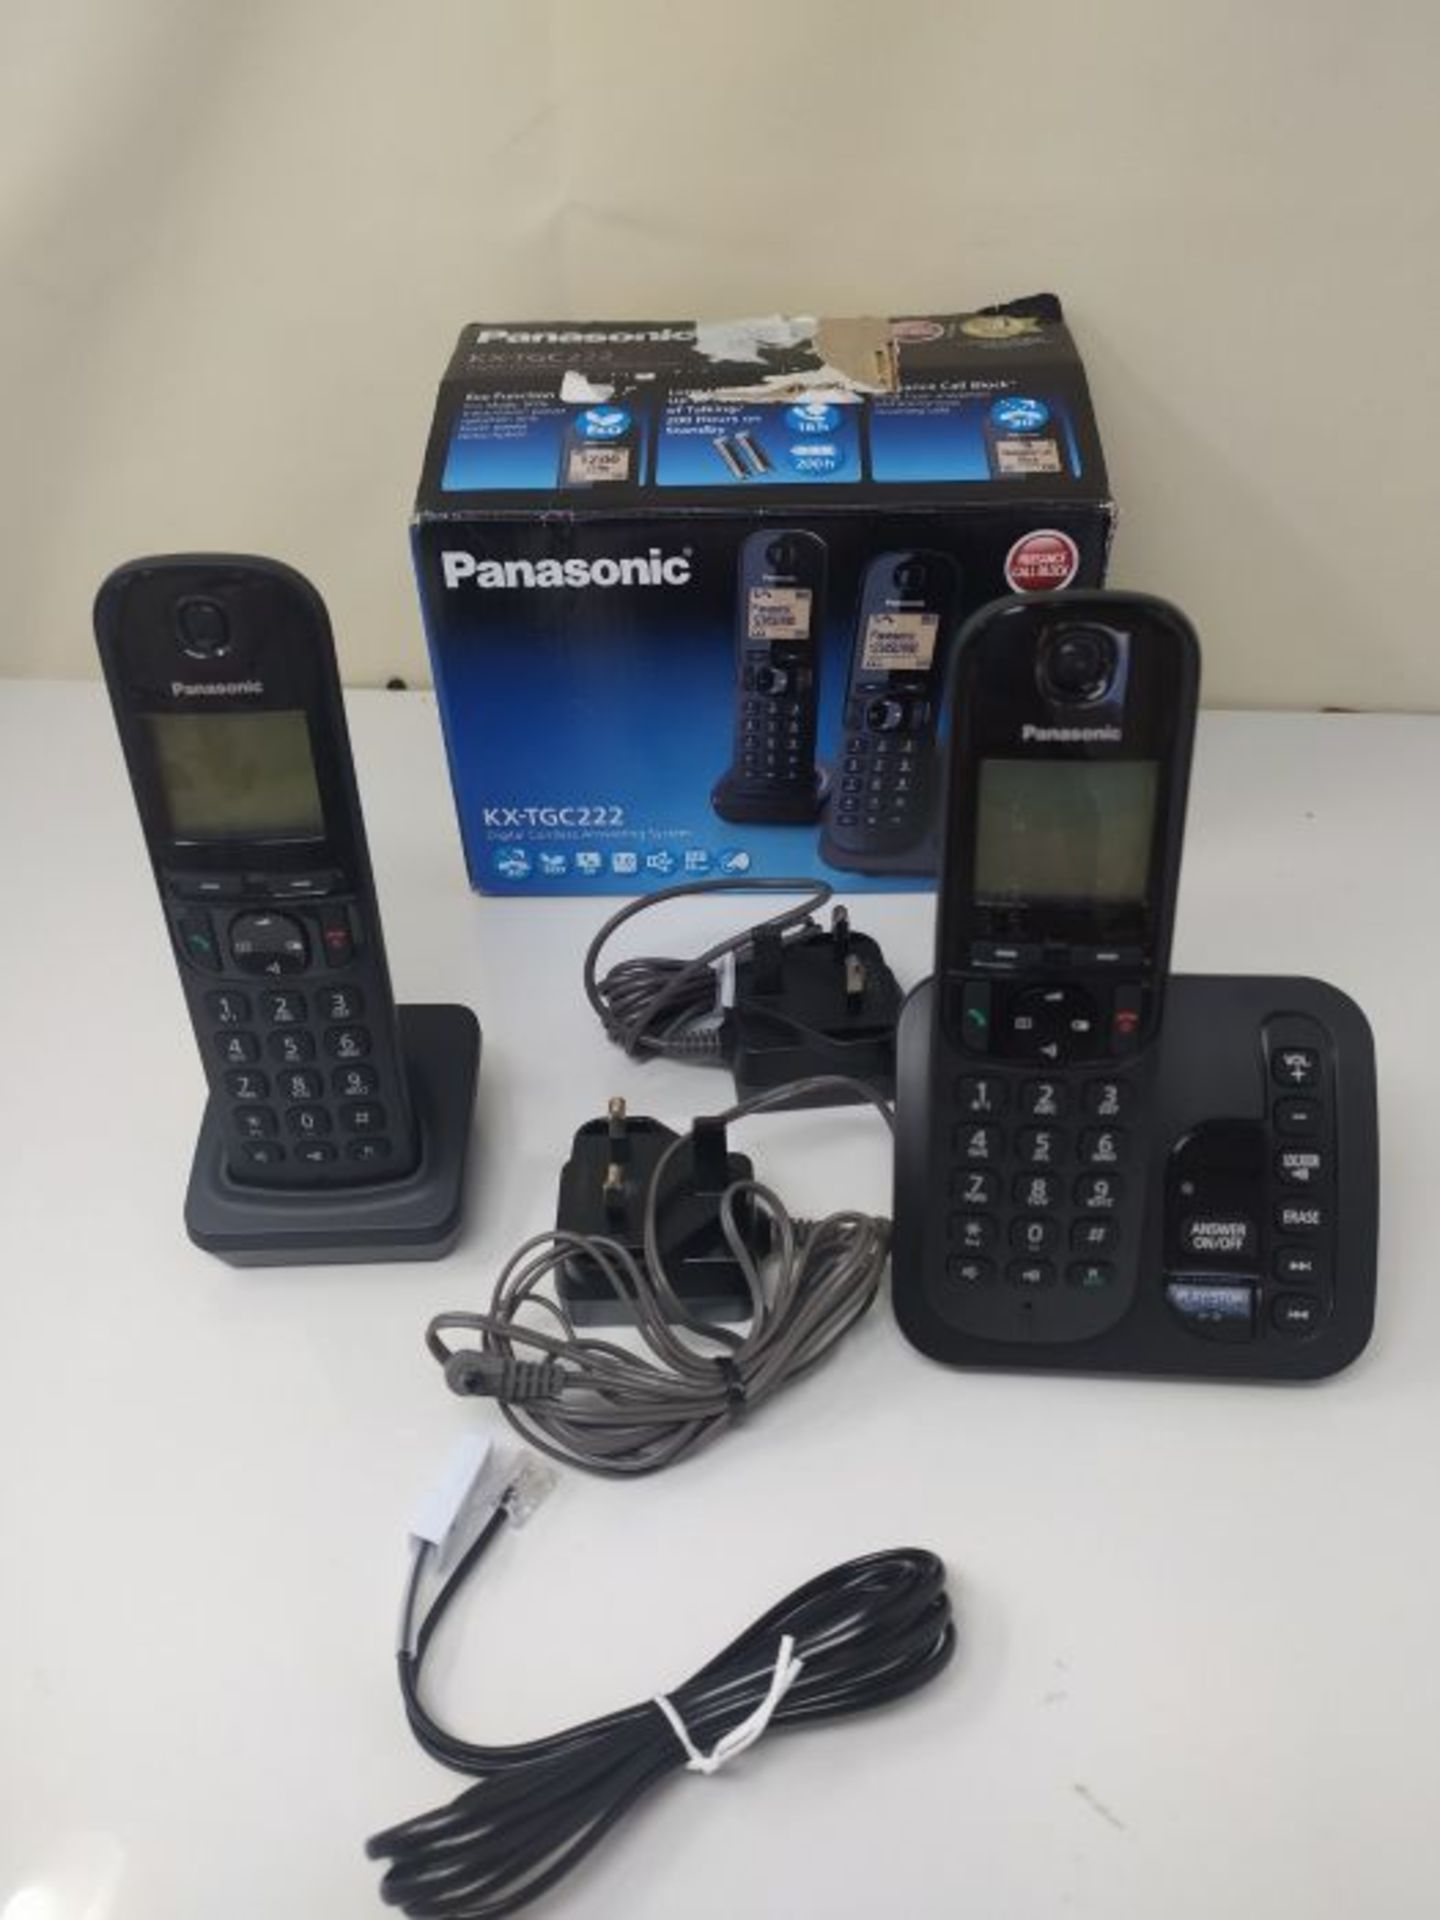 Panasonic KX-TGC222EB DECT Cordless Phone with Answering Machine, 1.6 inch Easy-to-Rea - Image 4 of 4